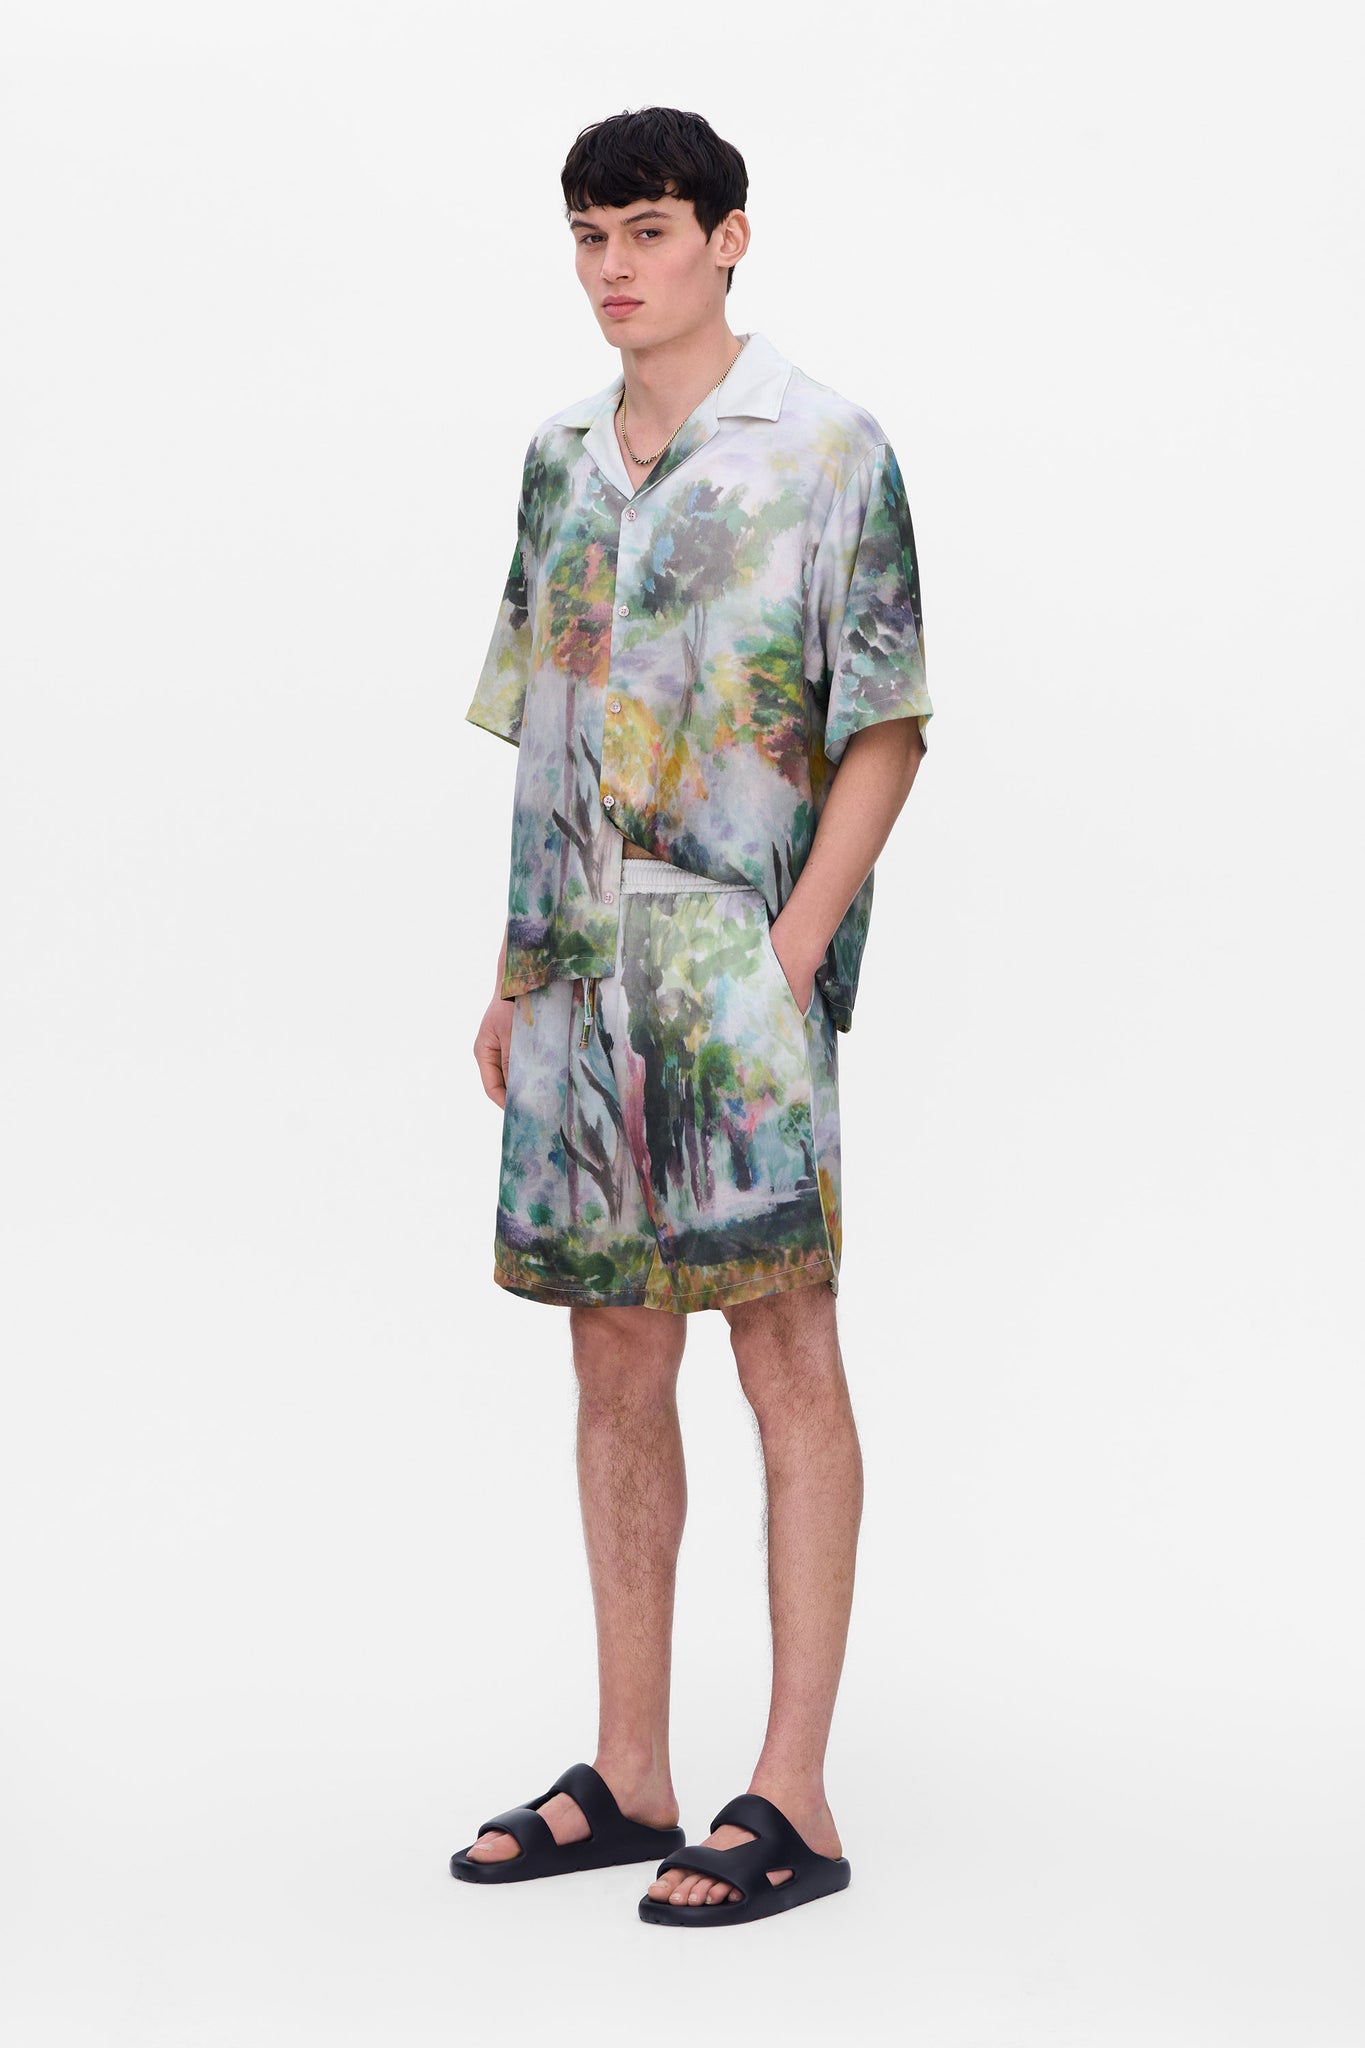 The Vacay shirt, Forest